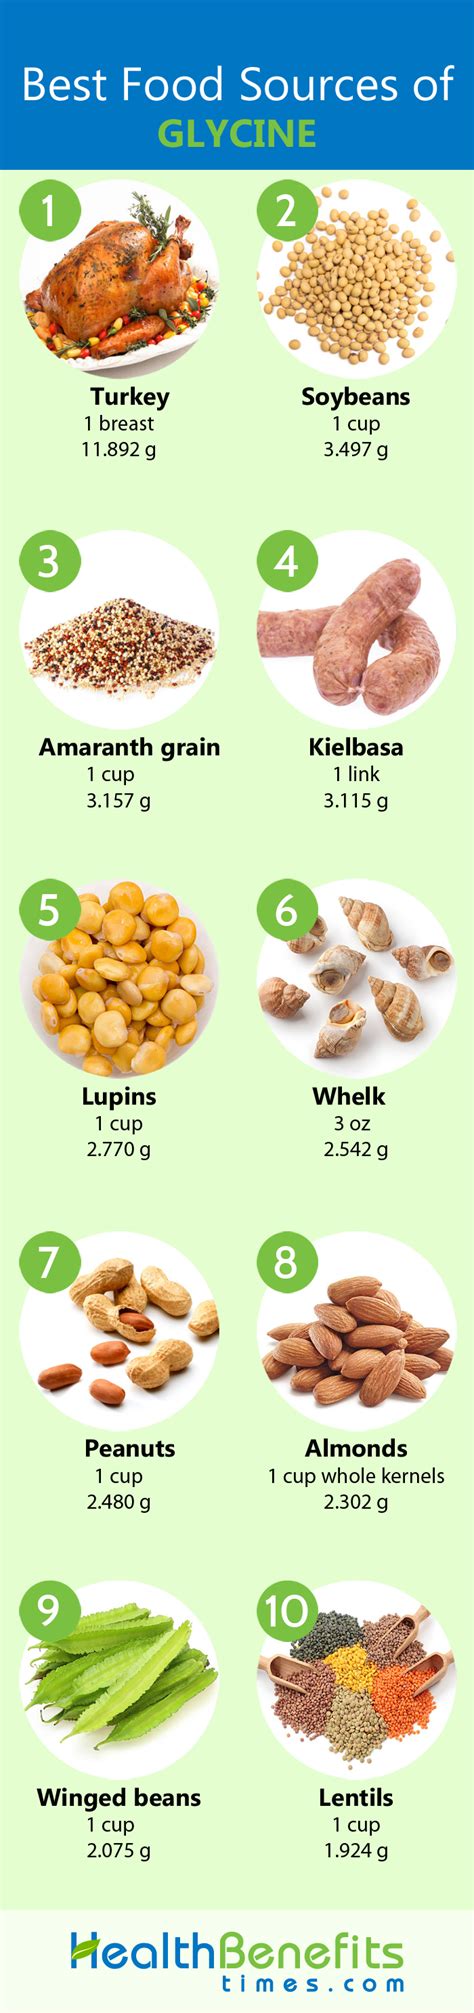 L-glycine assists with the growth of our cells and their health, and stimulates l-glutathione which fights free radical cell damage. . Top 10 foods highest in glycine